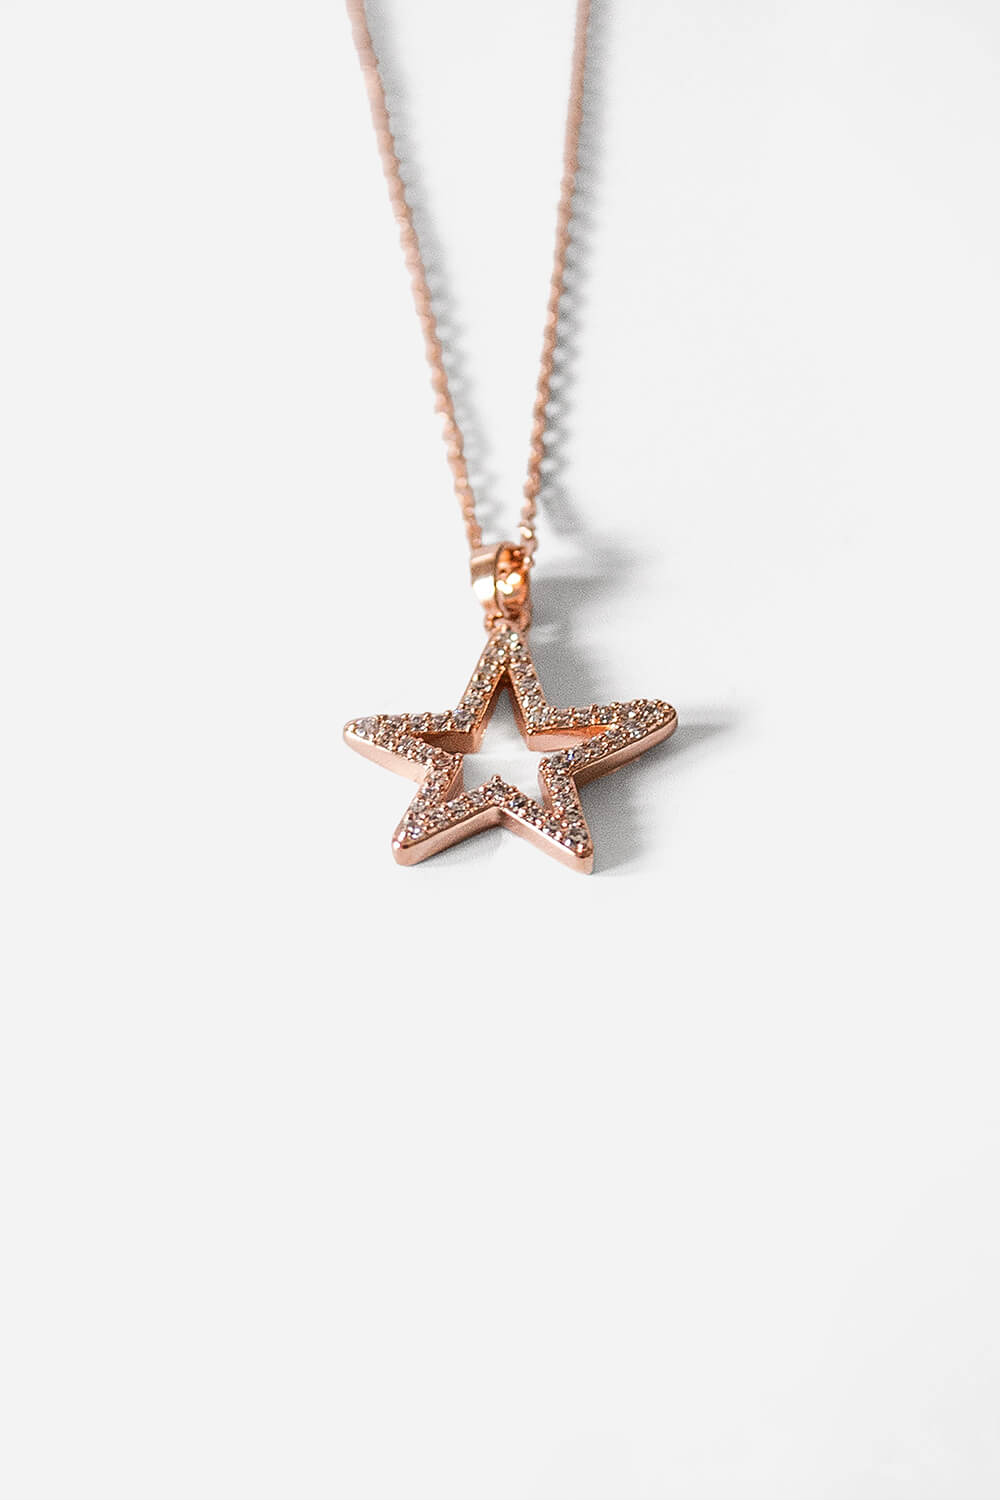 Rose Gold Cubuic Zirconia Star Necklace, Image 3 of 3